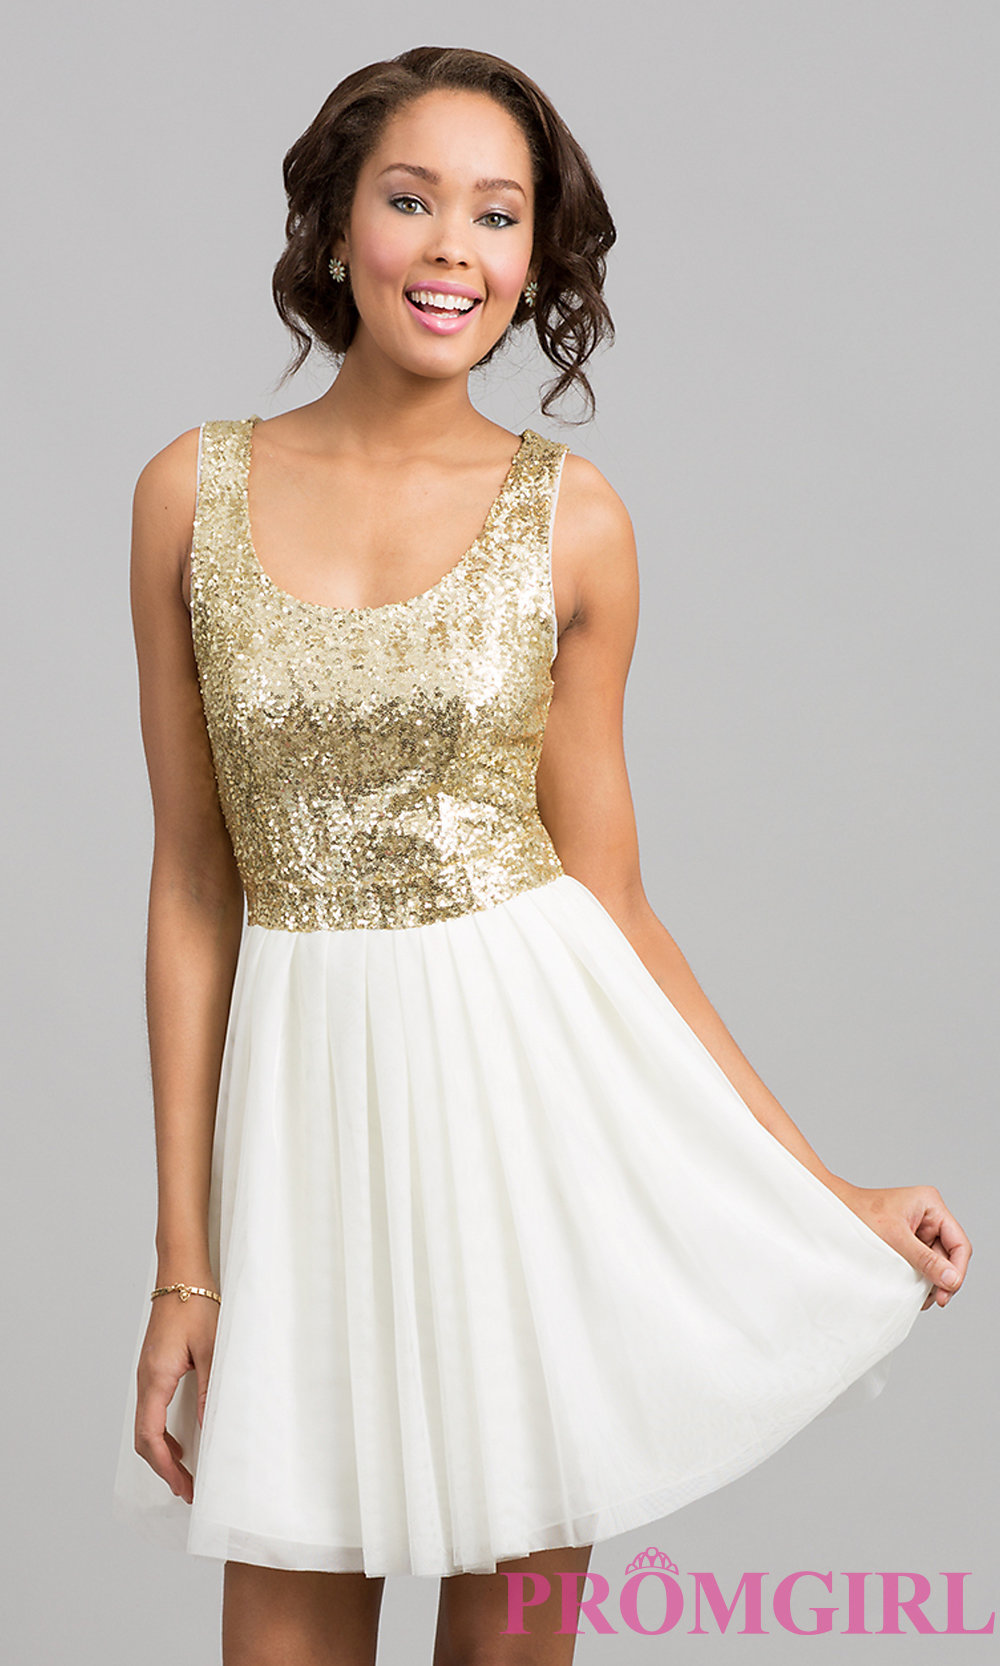 White Dress Gold Sequins & Make You Look Thinner